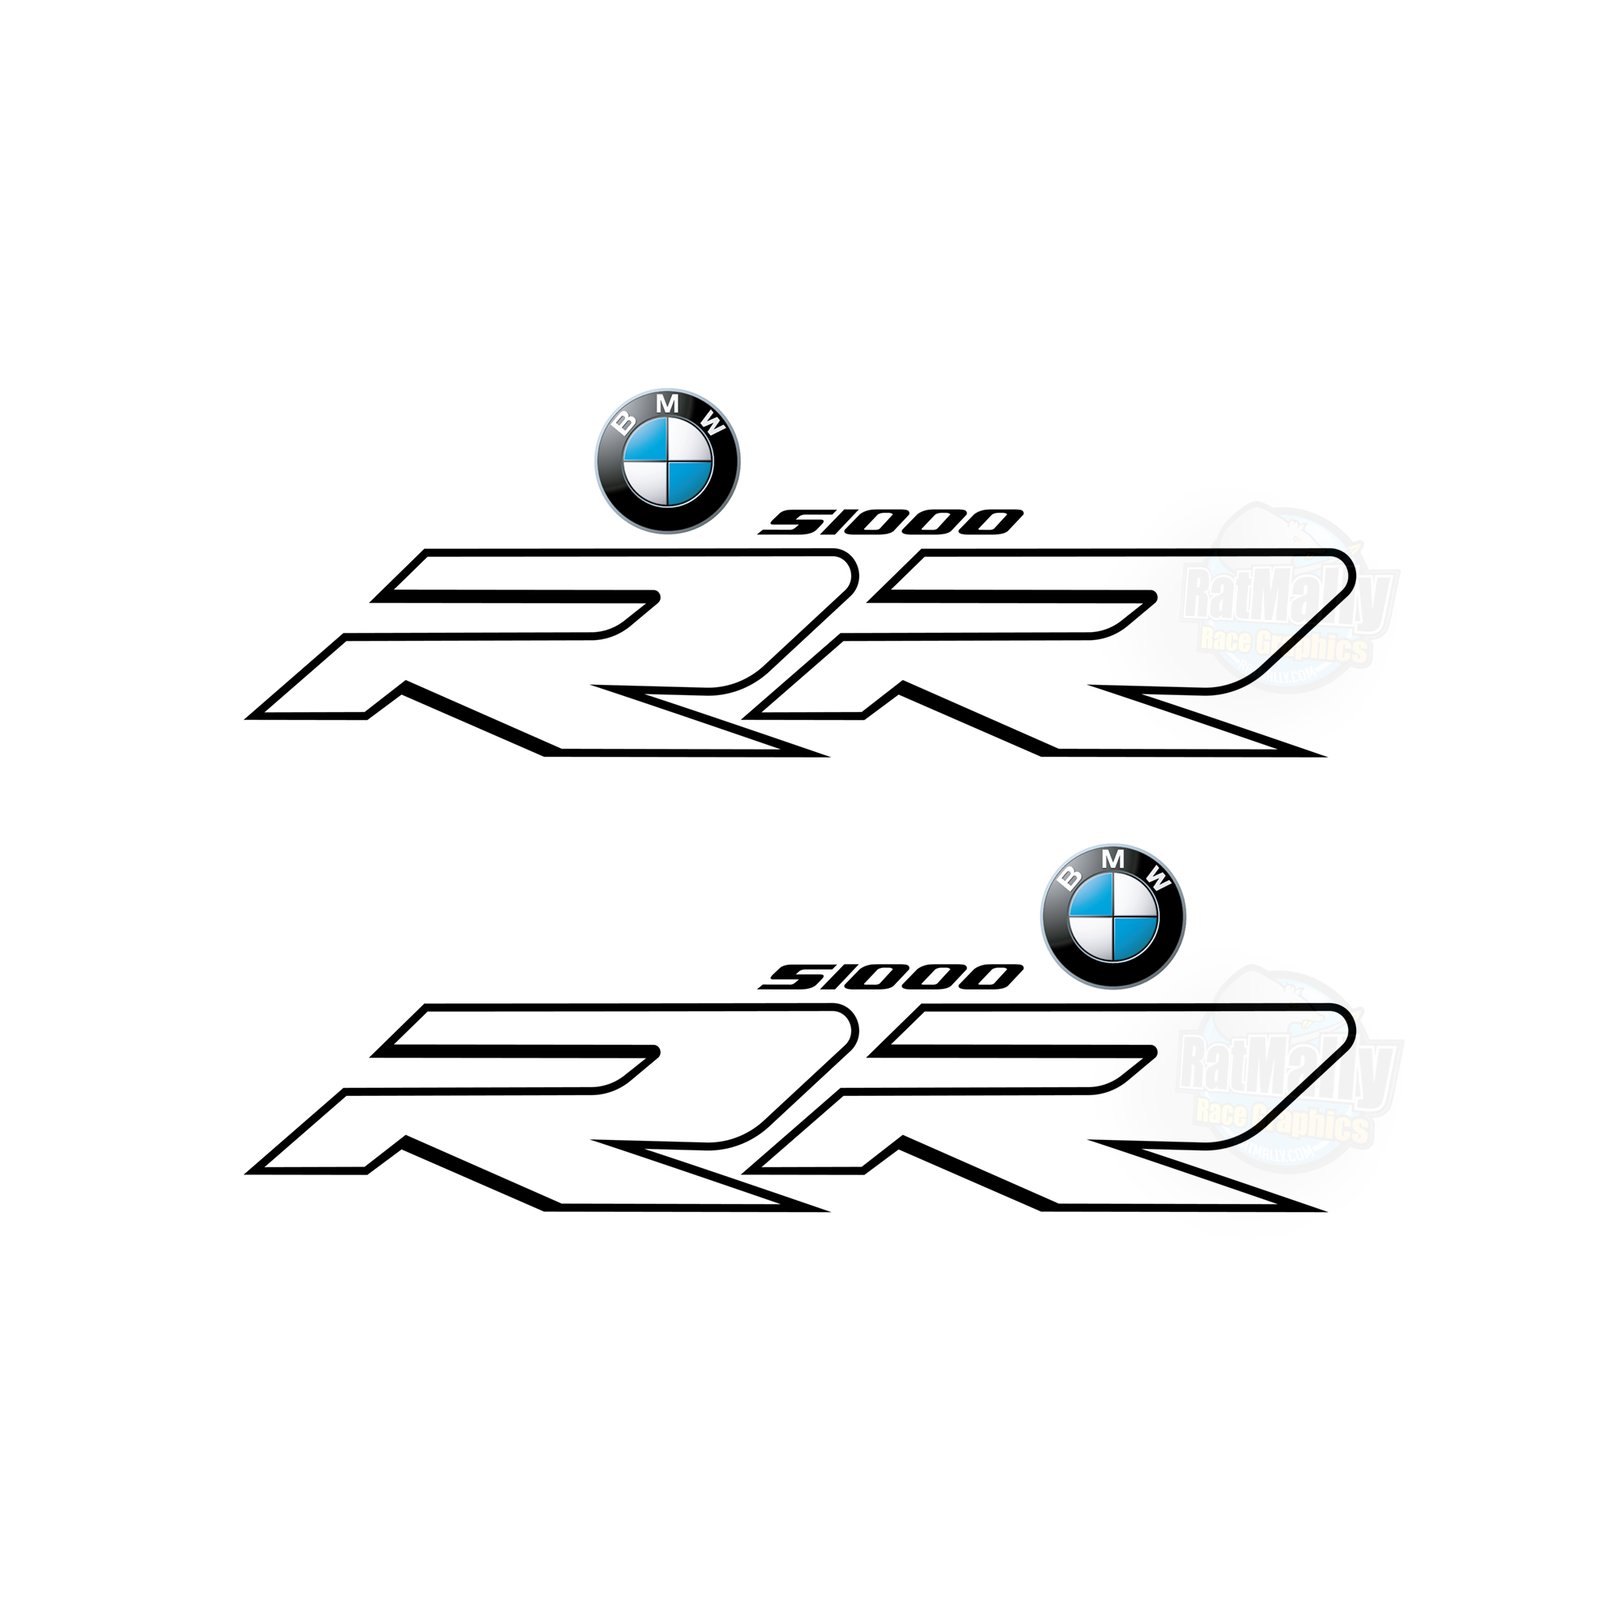 Bmw S1000 Rr Graphics Pack Ratmally Race Graphics